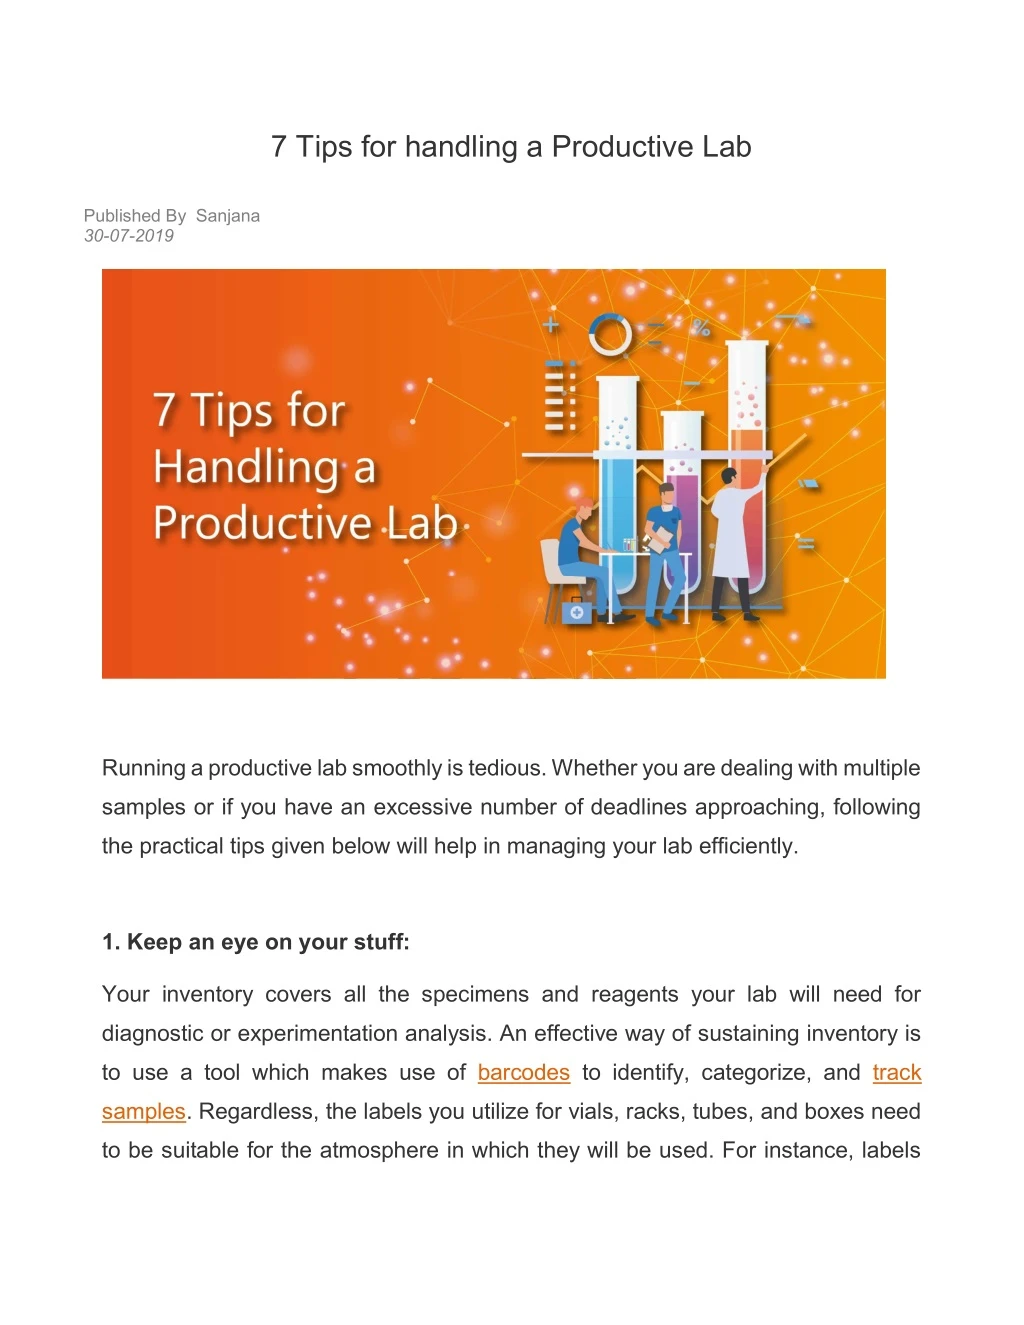 7 tips for handling a productive lab